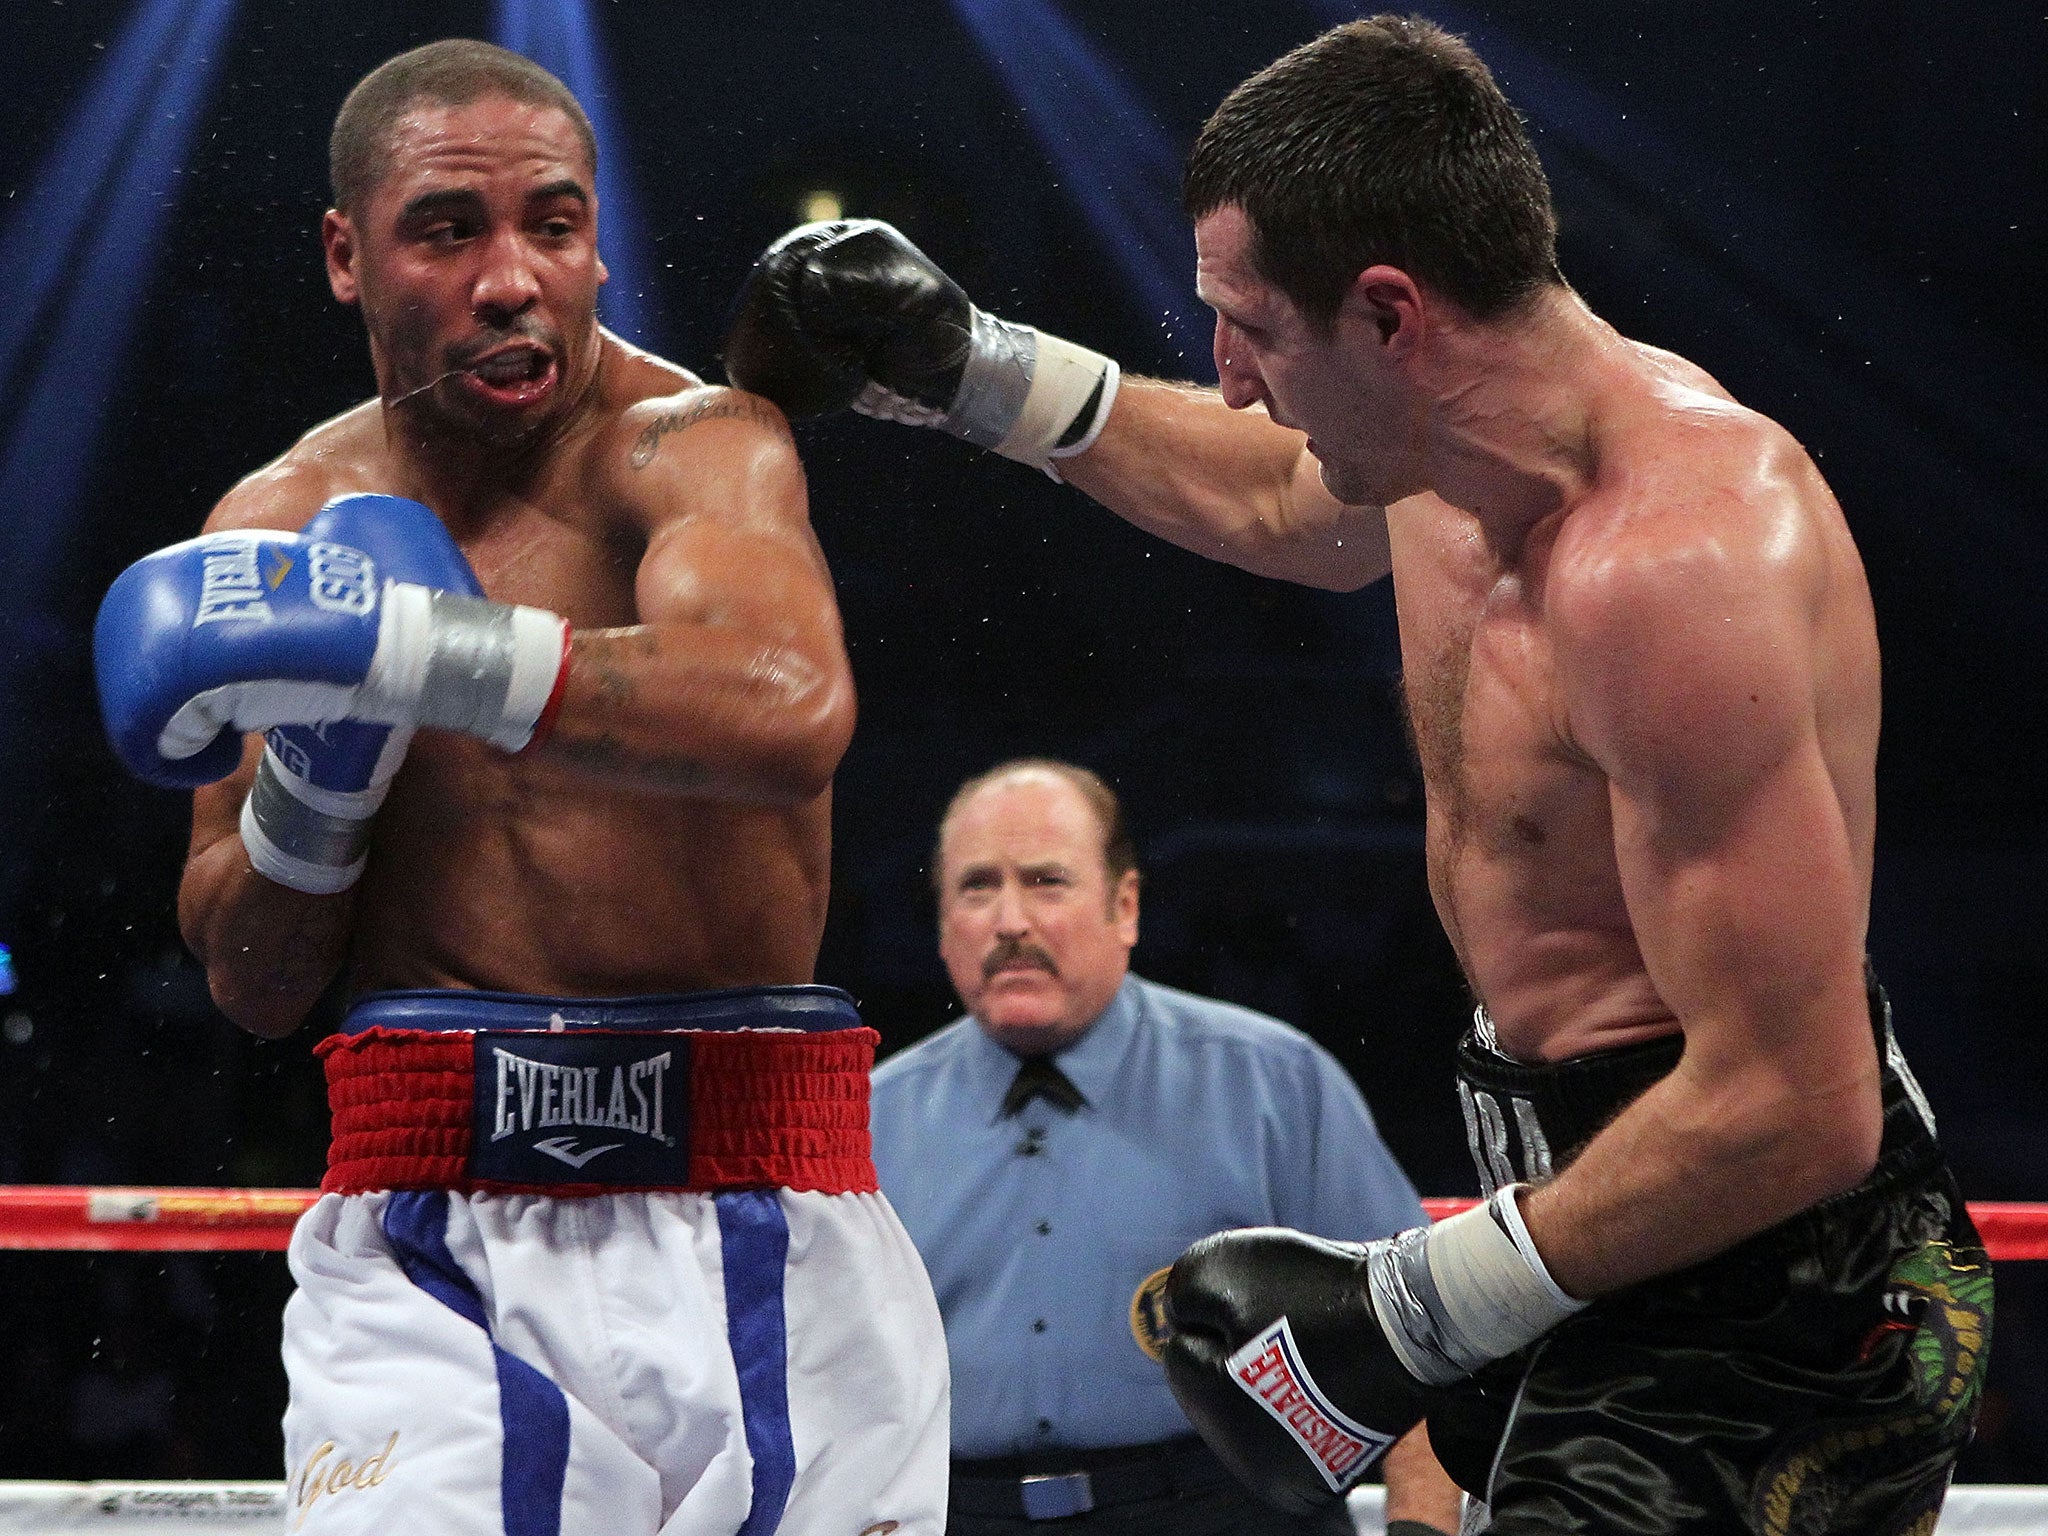 Andre Ward beat Carl Froch on points when they met in 2011